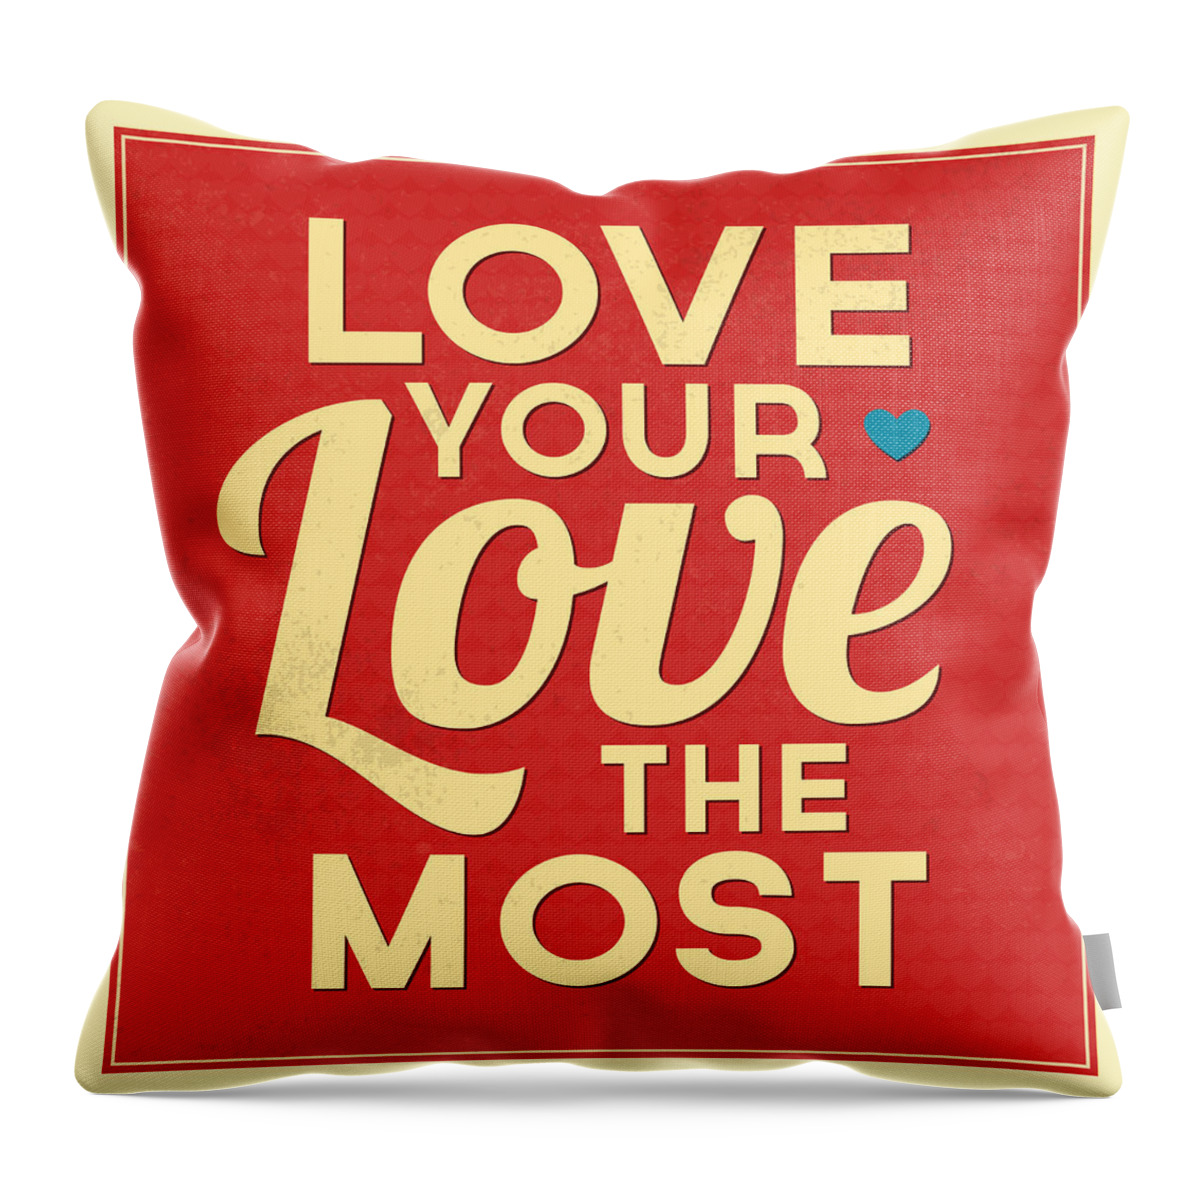 Motivation Throw Pillow featuring the digital art Love Your Love The Most by Naxart Studio